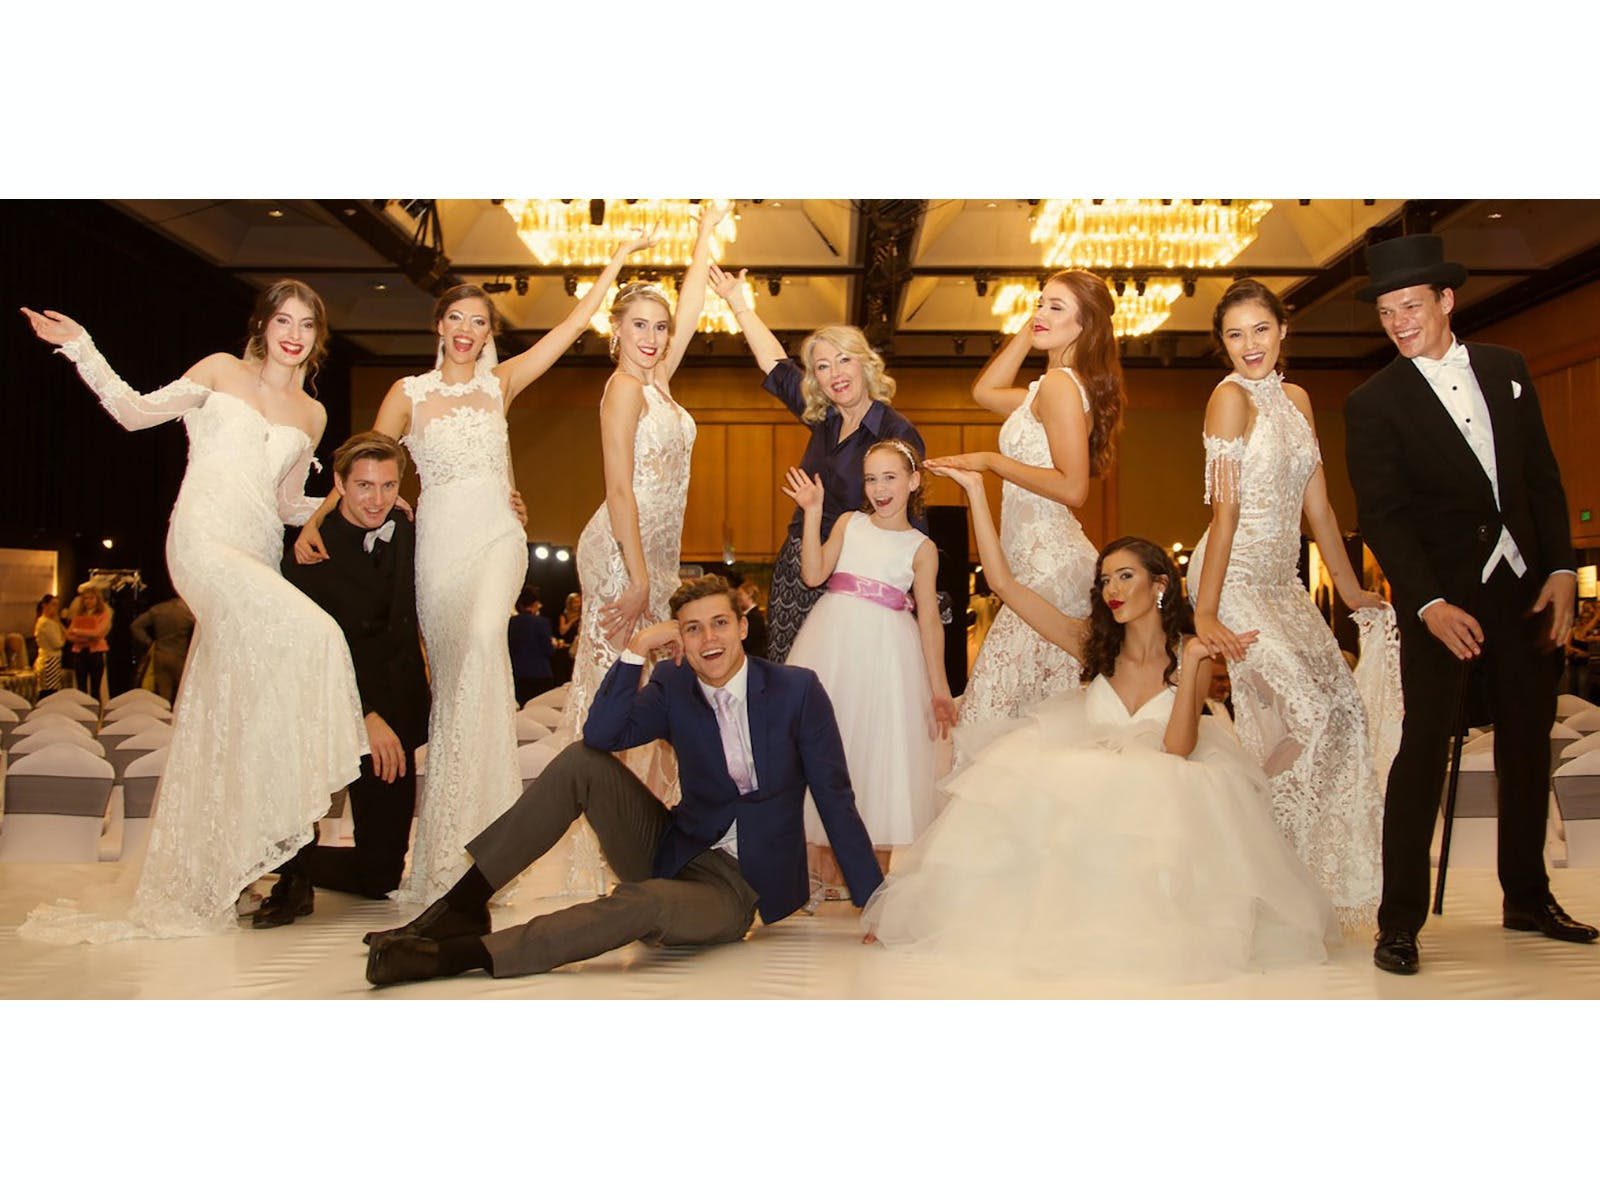 Gorgeous wedding gowns at Your Local Wedding Guide Brisbane Expo